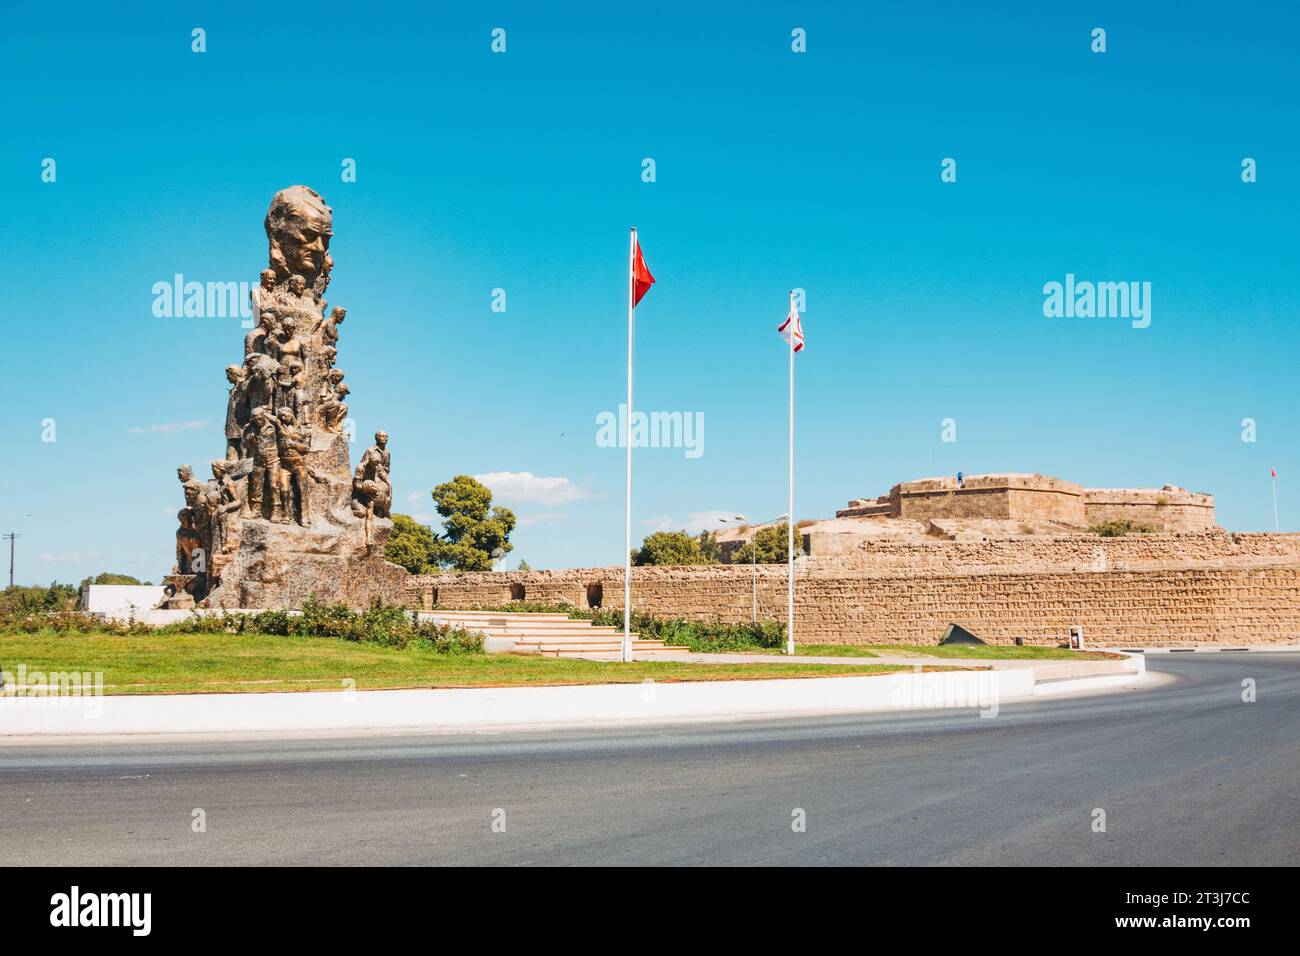 Great Freedom Monument, an Ataturk statue located next to Rivettina Bastion in Famagusta, North Cyprus. Sculpted in 1979 by Tankut Öktem Stock Photo